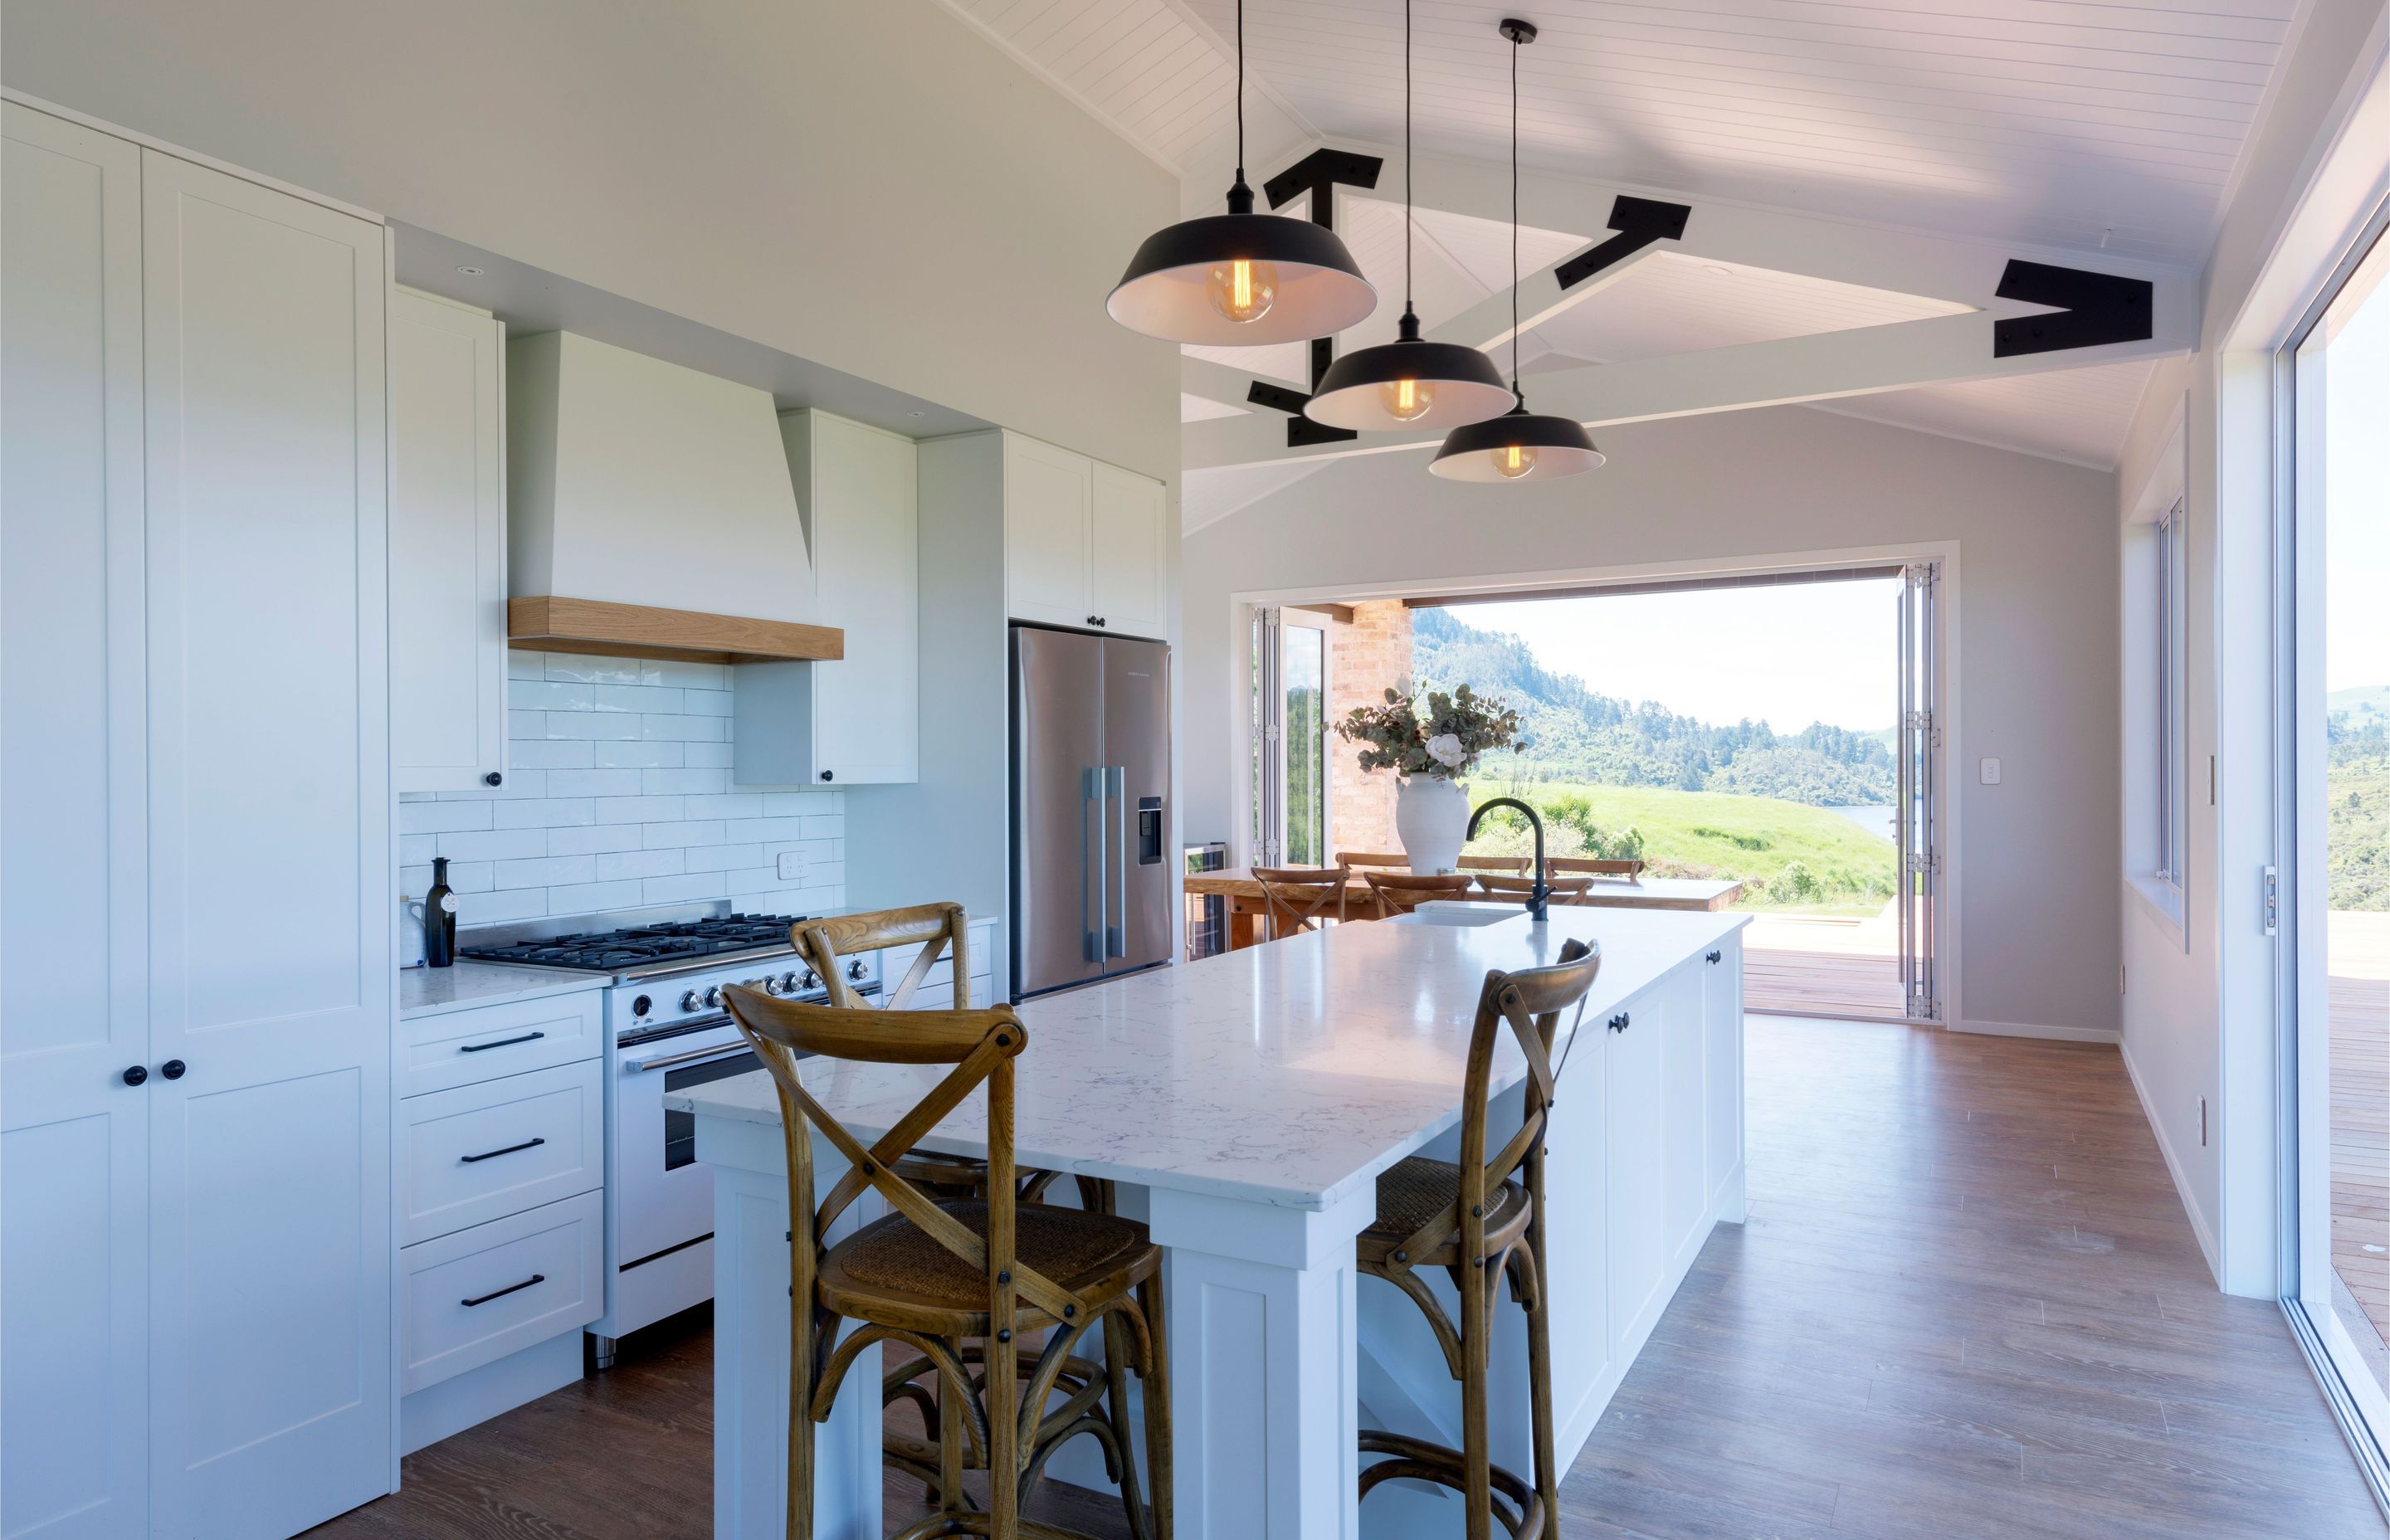 French Country-style kitchen where Arborform white satin cabinetry in the Ohope profile is complemented by Montrase pewter knobs and Delmore pewter cup handles. An island bench in Eurostone Constellation White from Pacific Stone is pristine beneath the vi